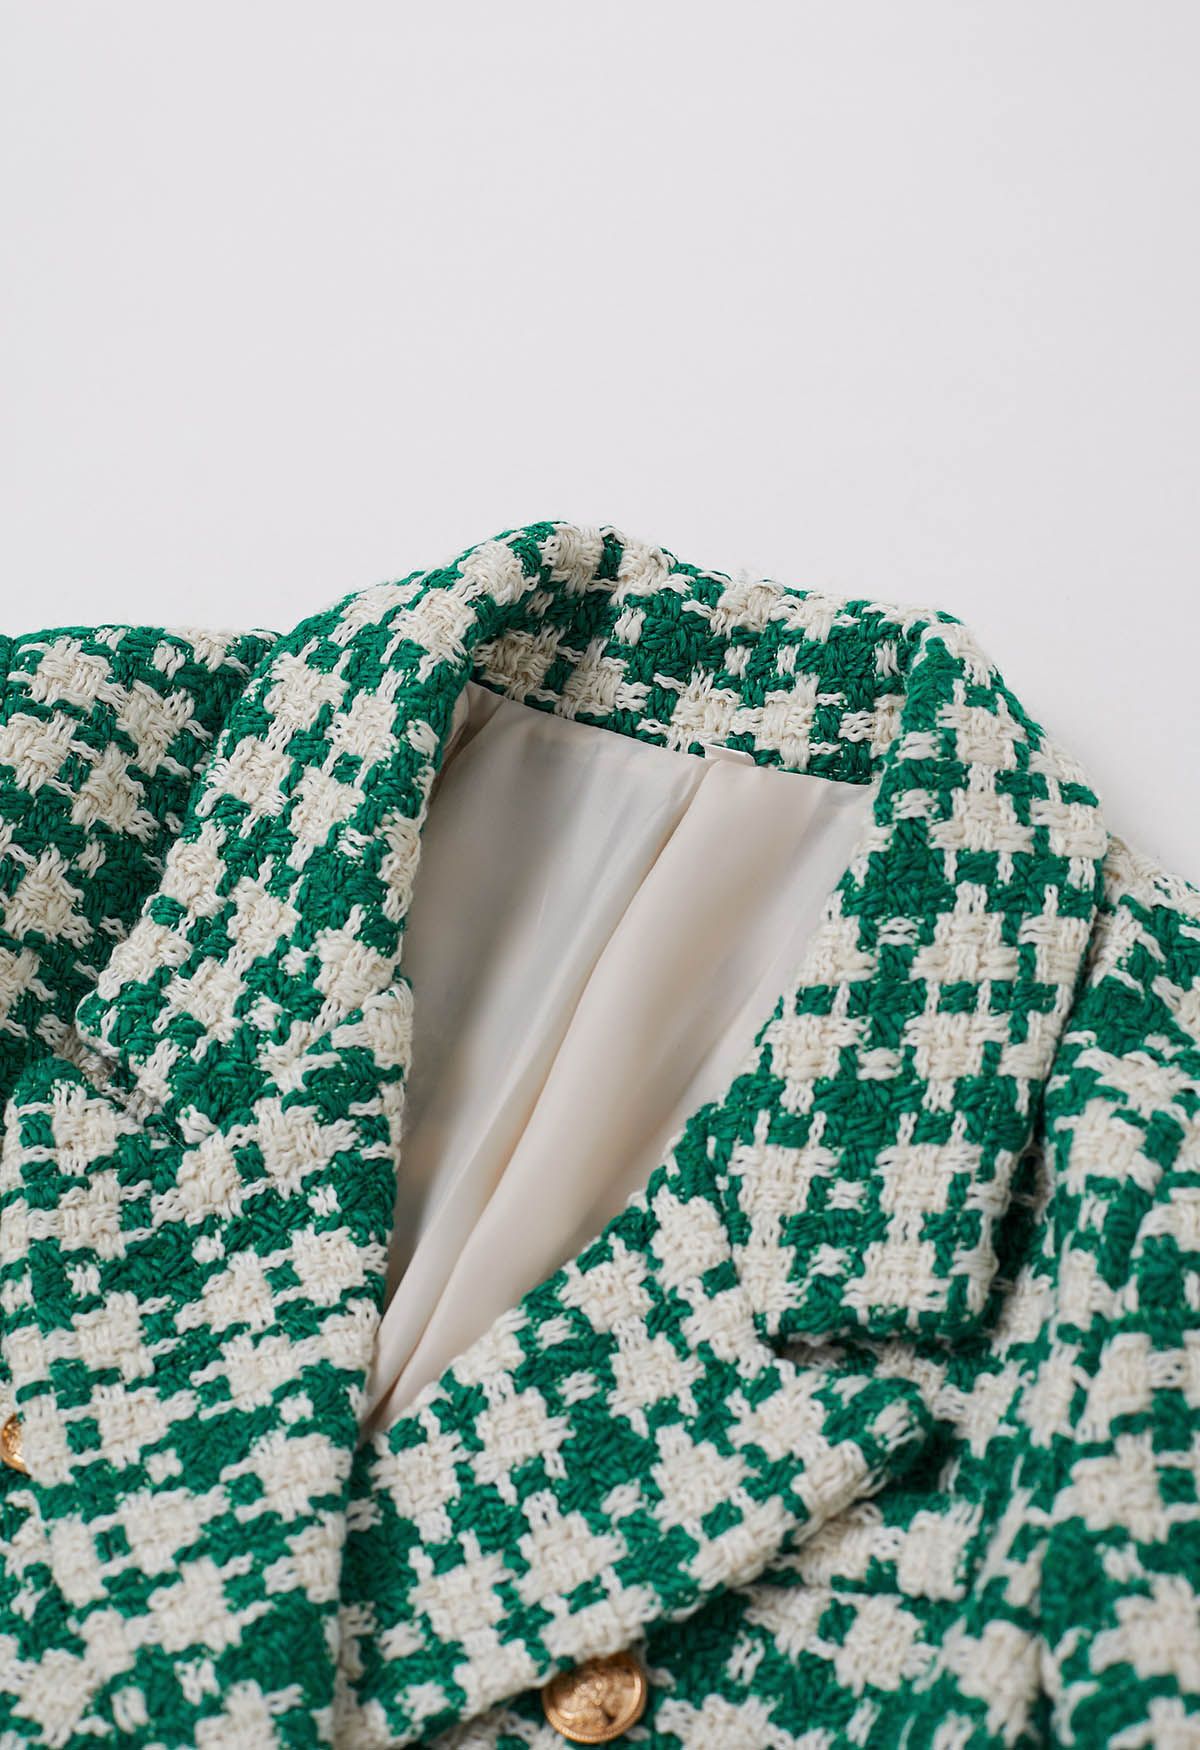 Lush Houndstooth Tweed Double-Breasted Blazer